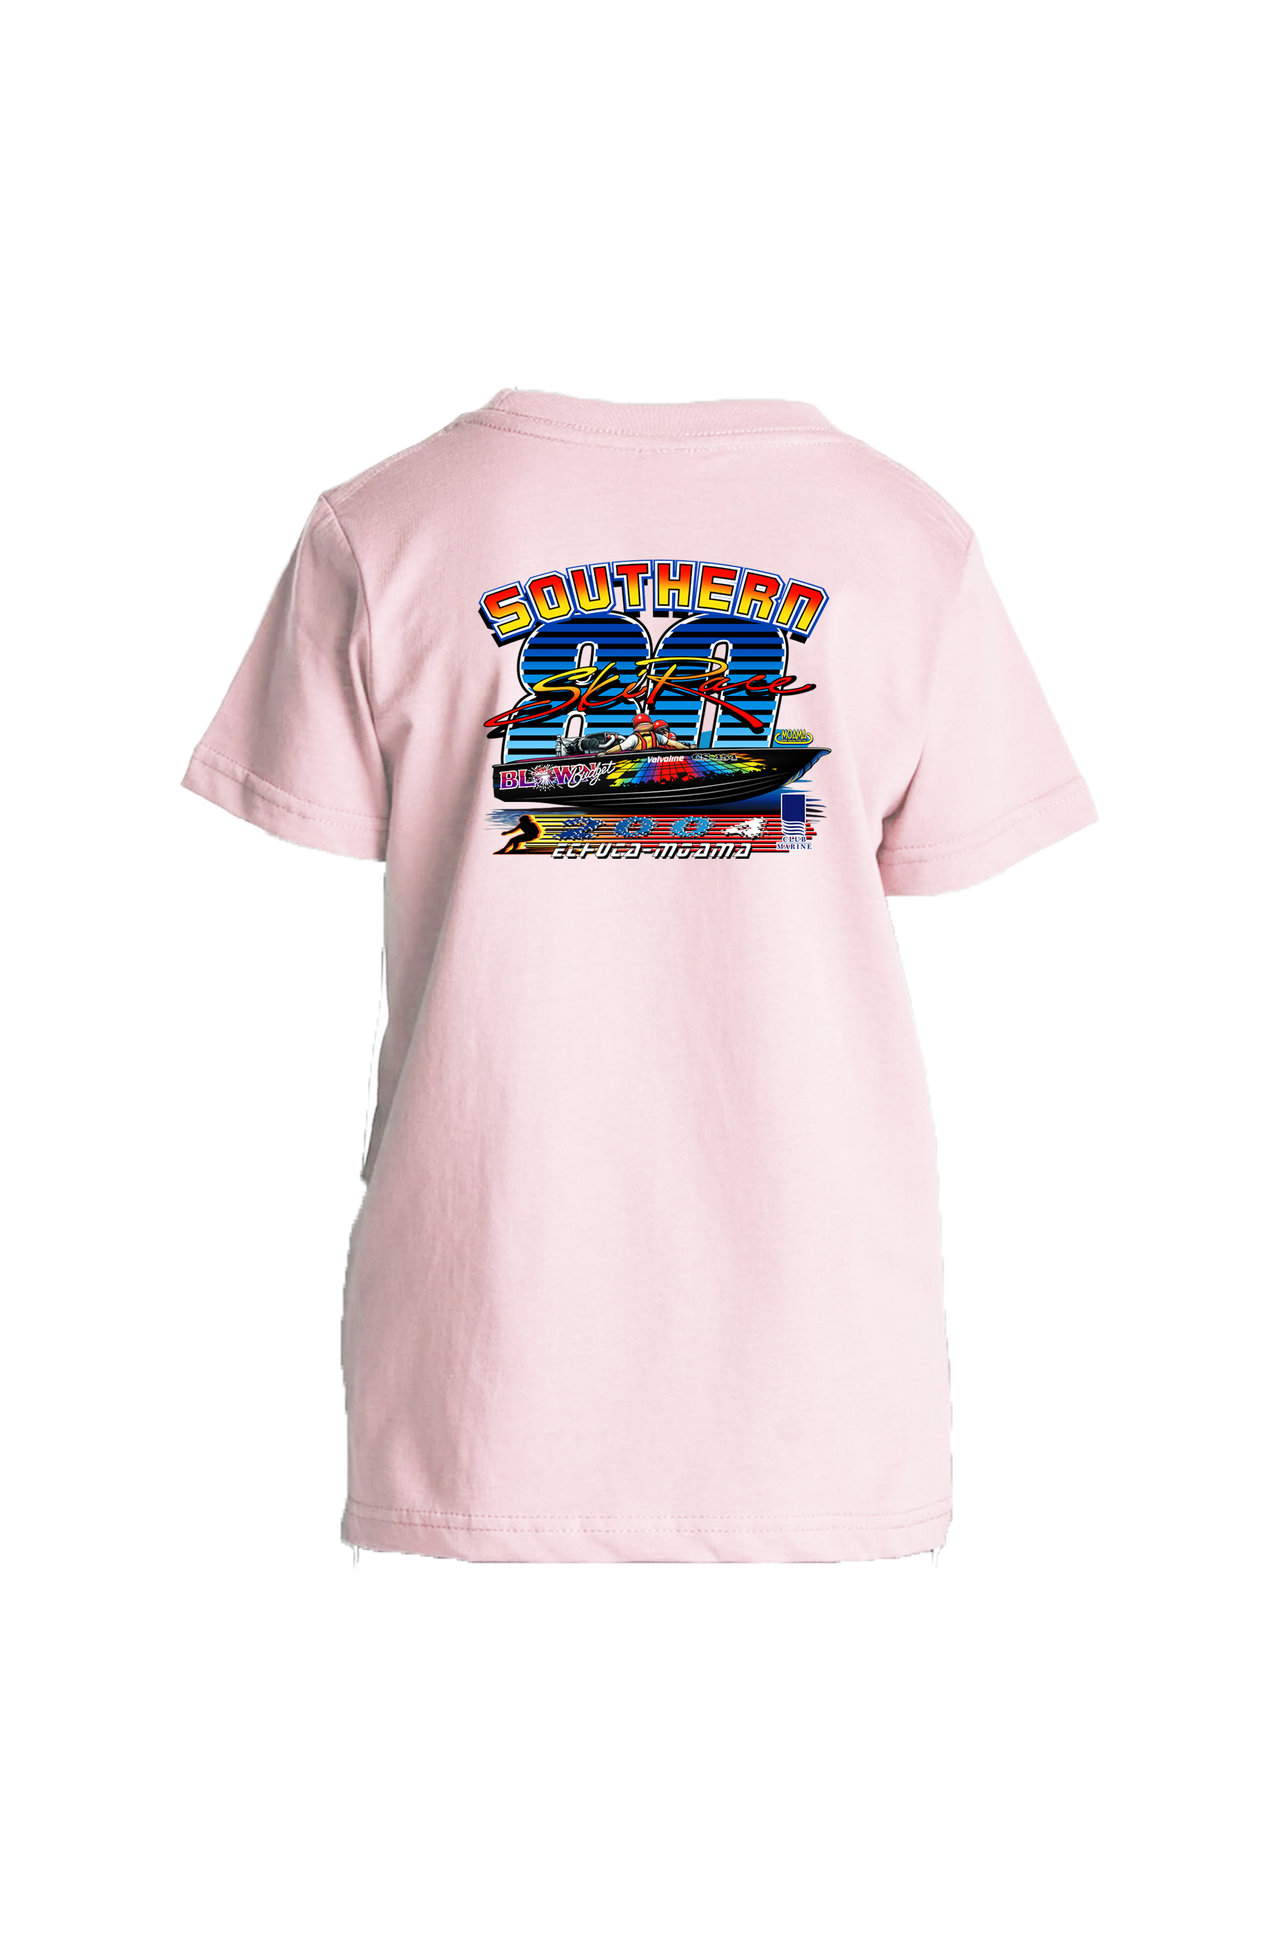 S80 2004 Blown Budget Youth Tee